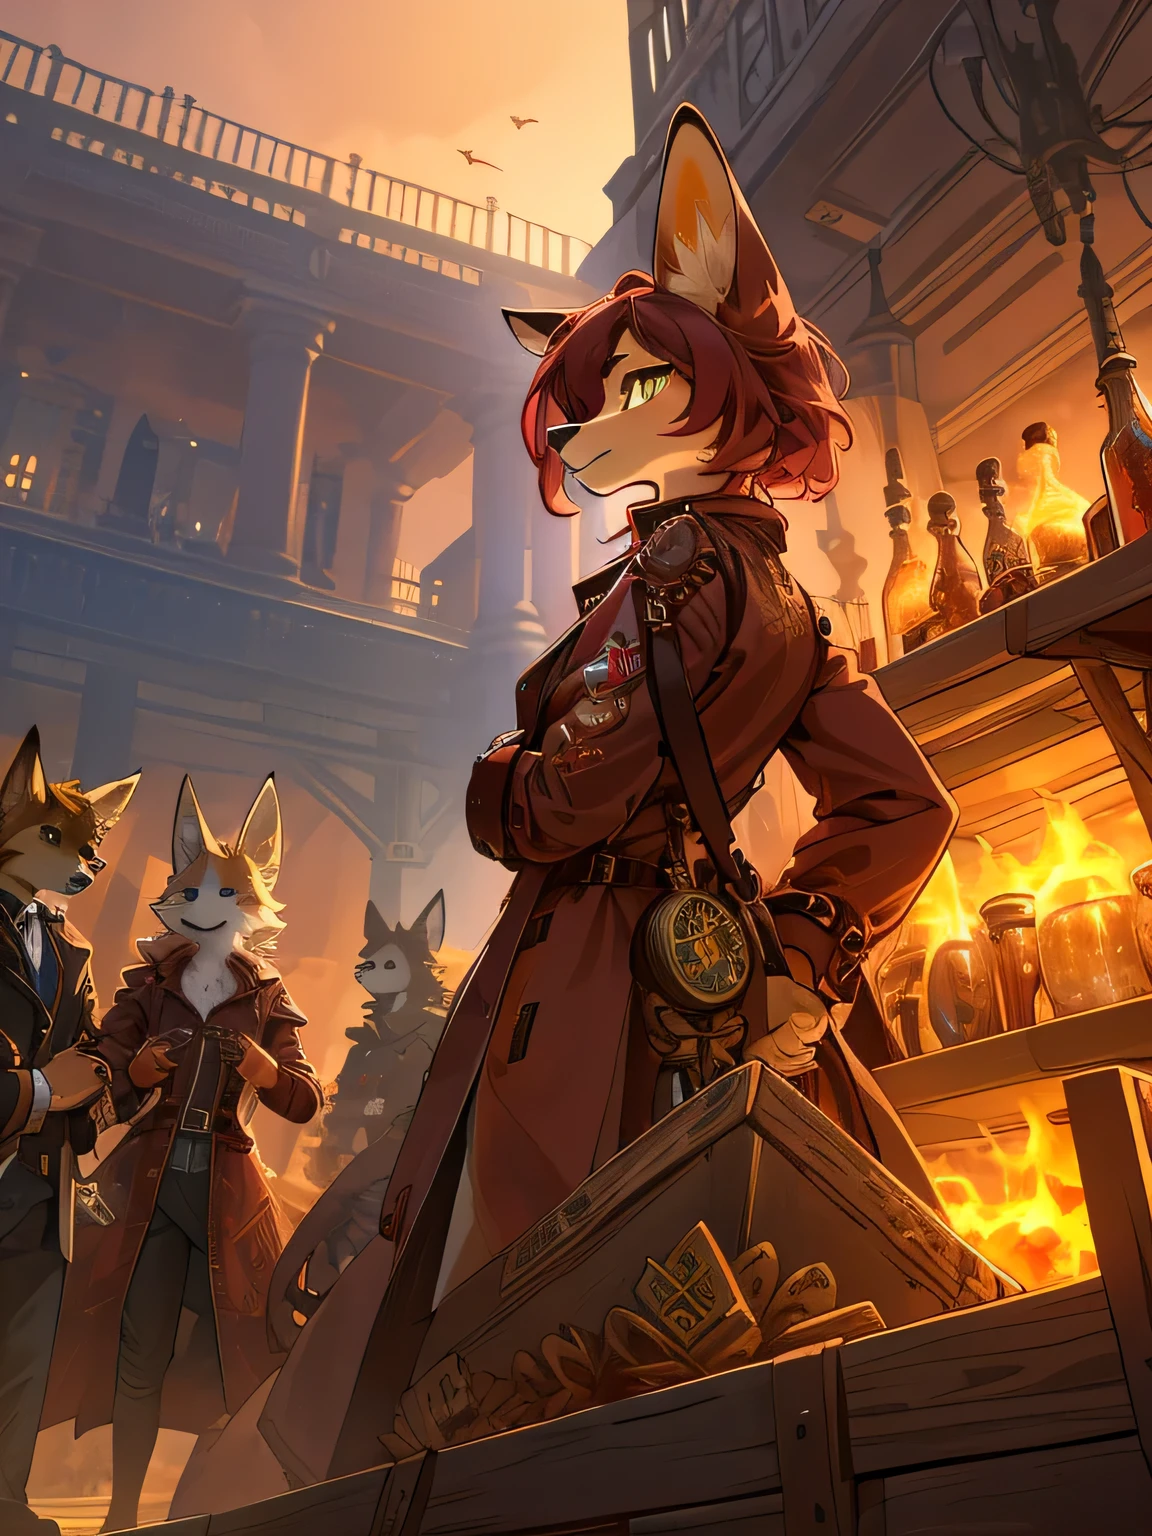 A commanding, confident female fennec fox [1girl] with strikingly detailed, piercing golden eyes [beautiful detailed eyes] shouts across to workers on a series of stacked crates, furry, dressed in a vibrant red trench coat [red trench coat]. She commands a group of workers, directing them to move heavy objects [ordering workers to move things] amidst the thick, dusty air. The image is of the highest quality [best quality, high-res, 4k, masterpiece:1.2], steampunk_costume, capturing the ultra-detailed features of every element in the scene. The artistic style combines elements of realism and concept art, with a dominant color palette of muted red tones contrasting against the dusty surroundings. Interesting composition, depth of field, interesting perspective